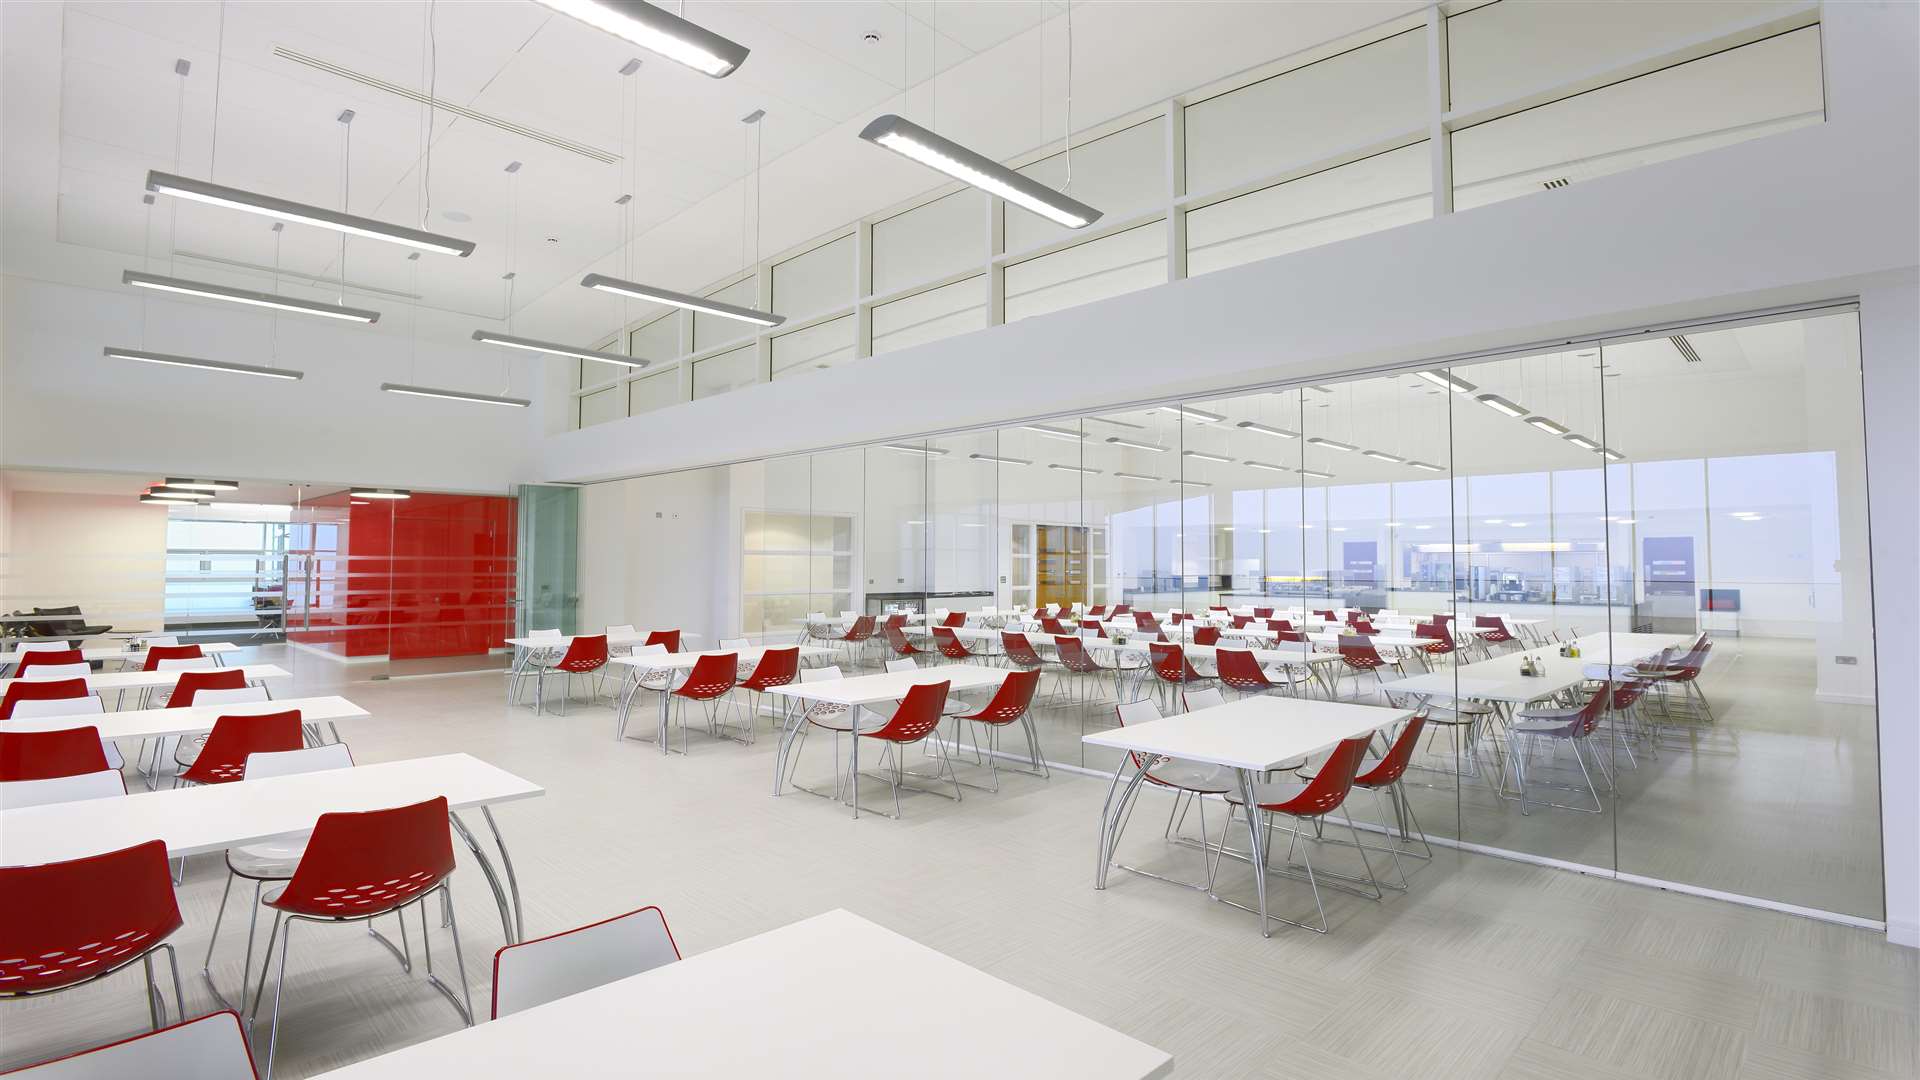 Frameless Glass Curtains installed partitions at Manchester United's Carrington training ground